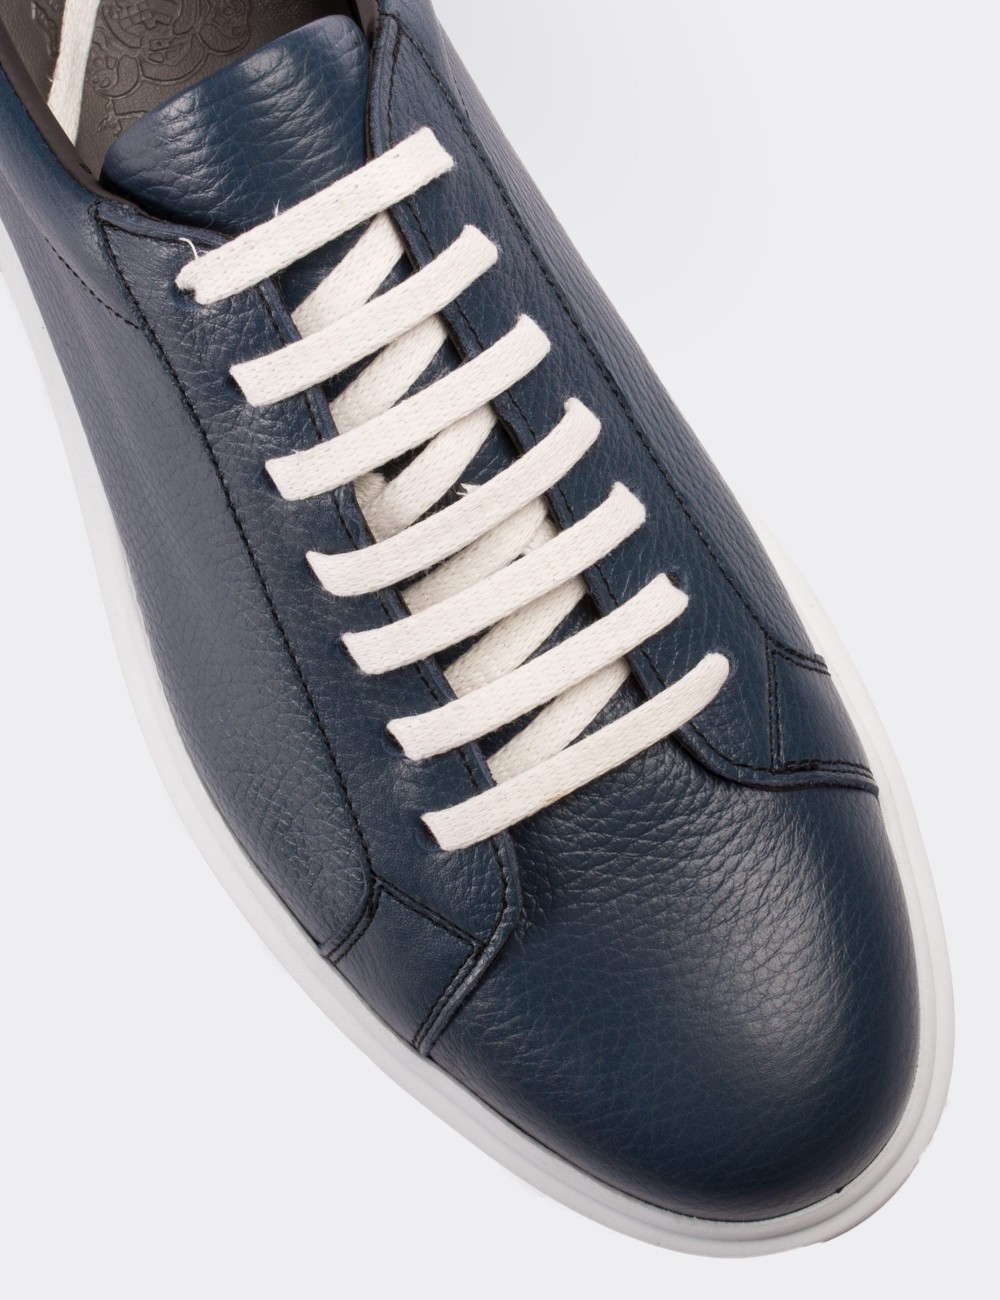 Blue  Leather Sneakers - 01673MMVIP01